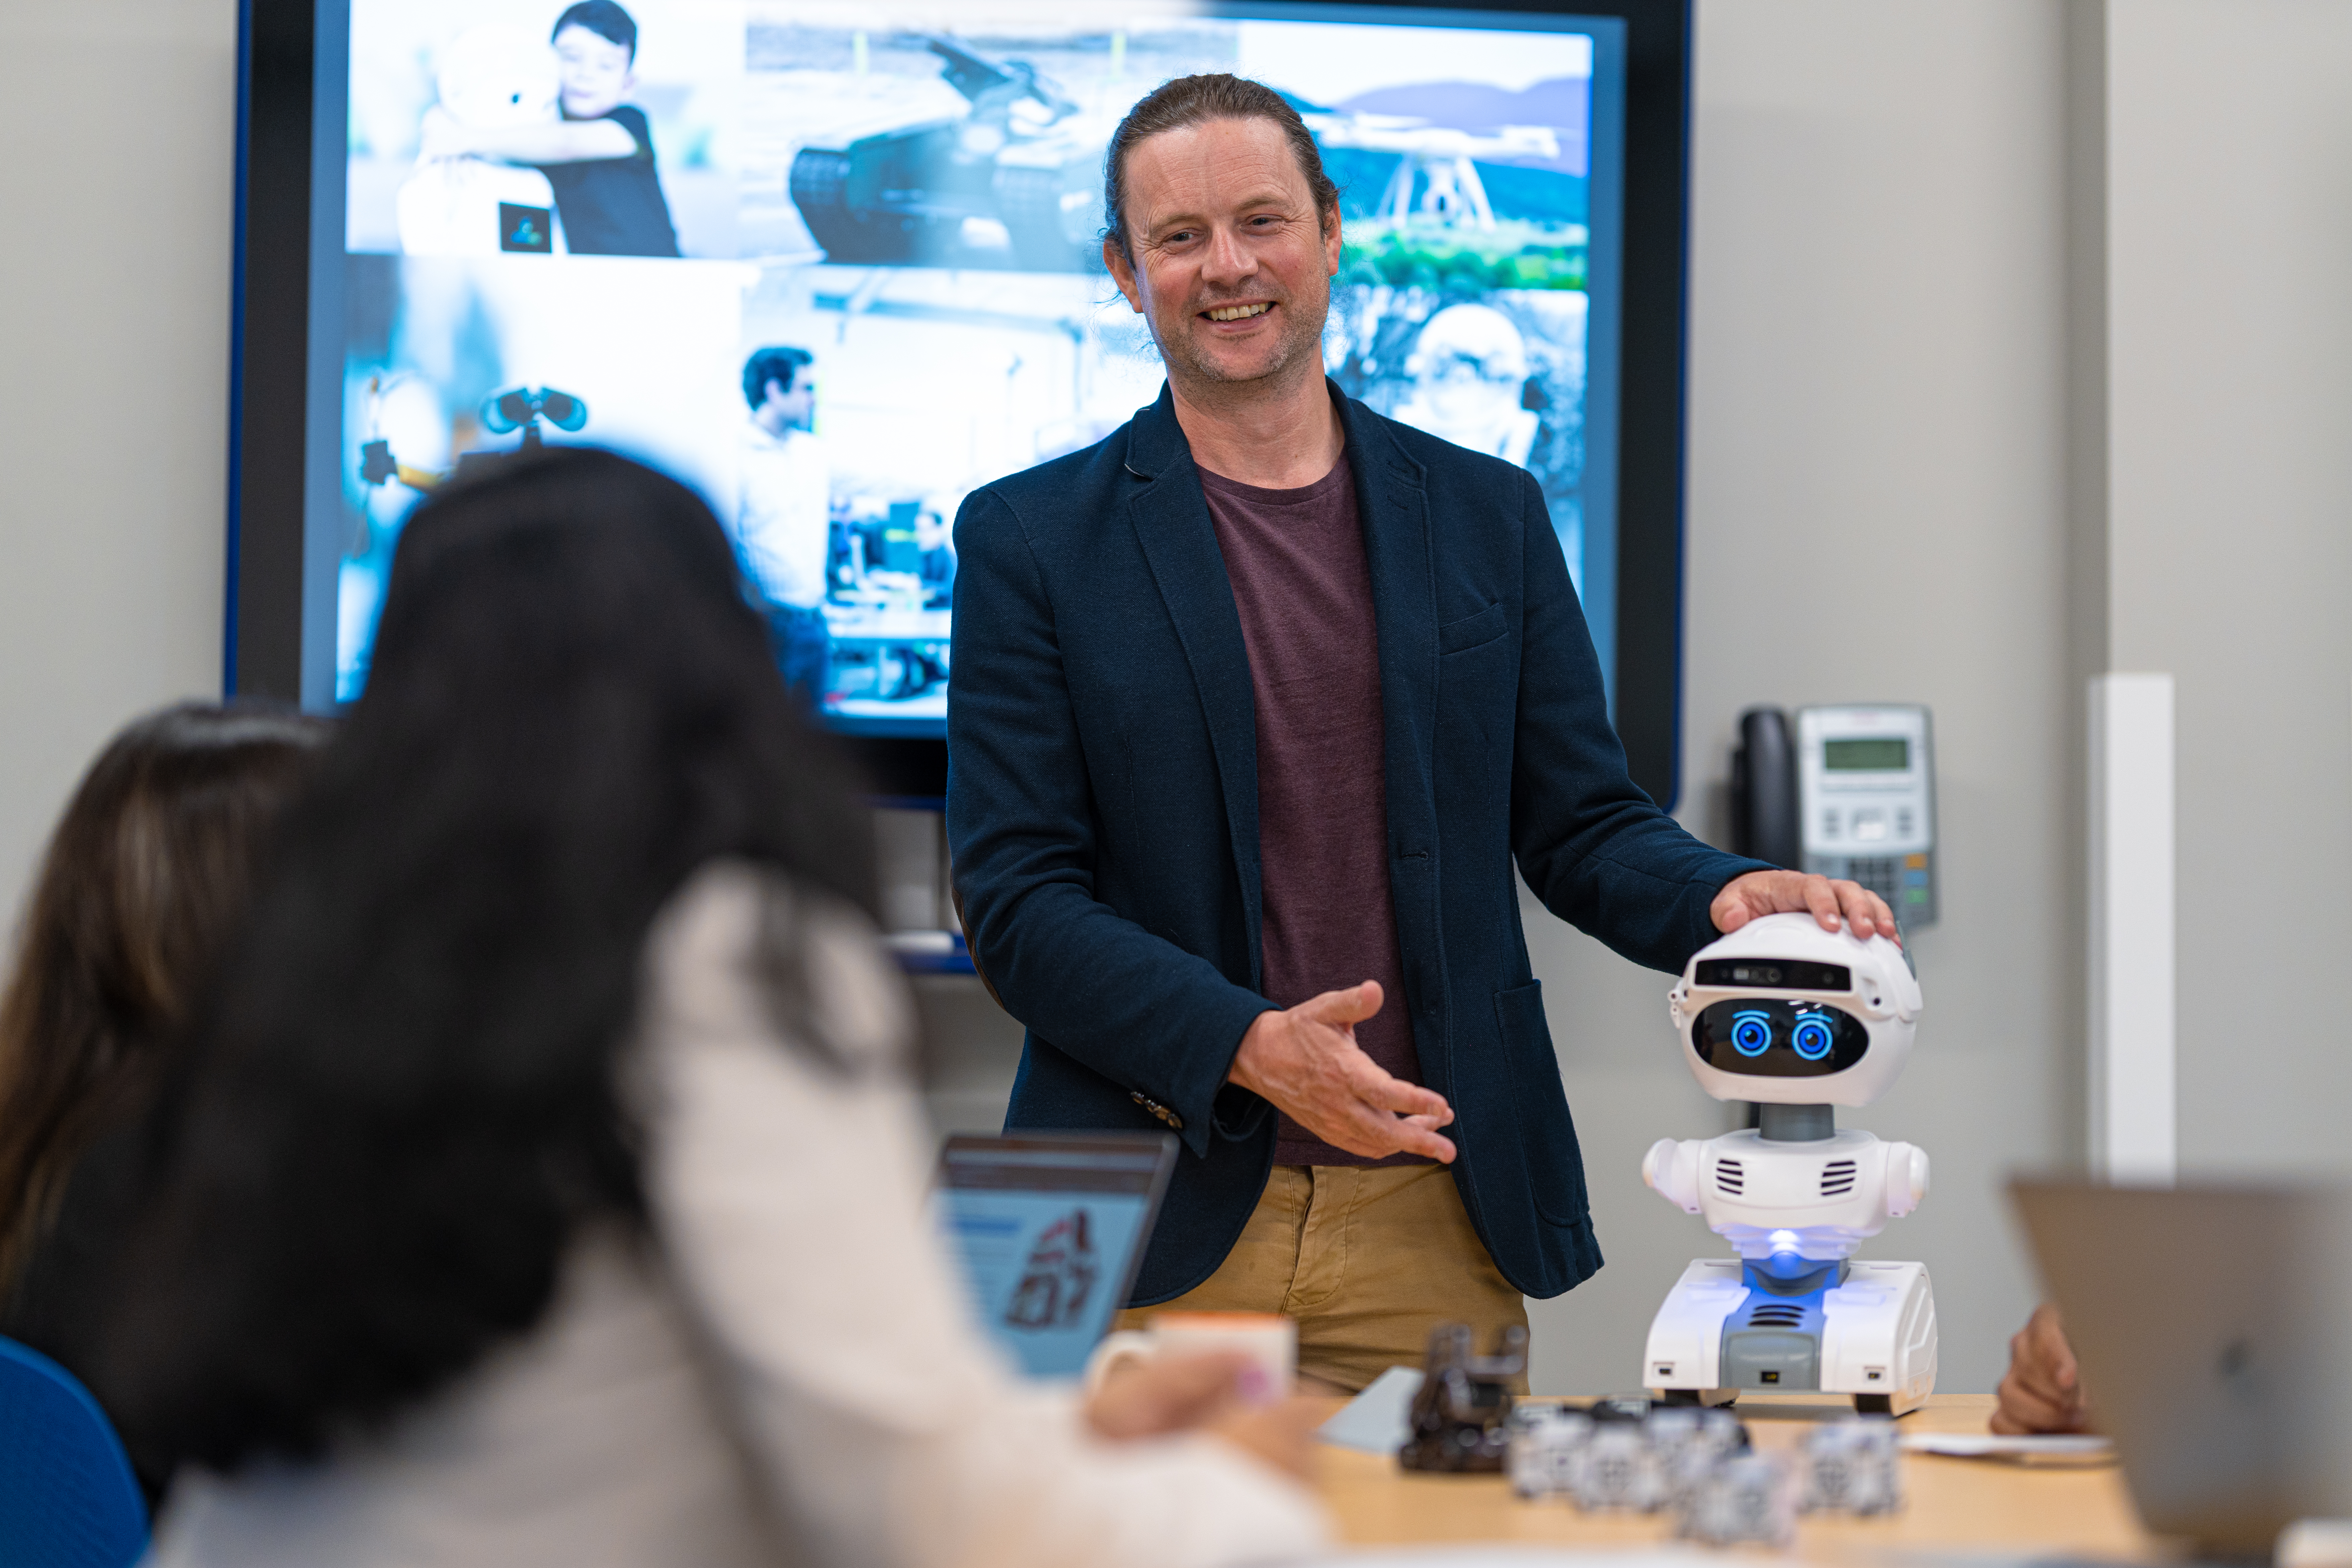 a person standing facing a group of people at a table smiling with a small robot on the table